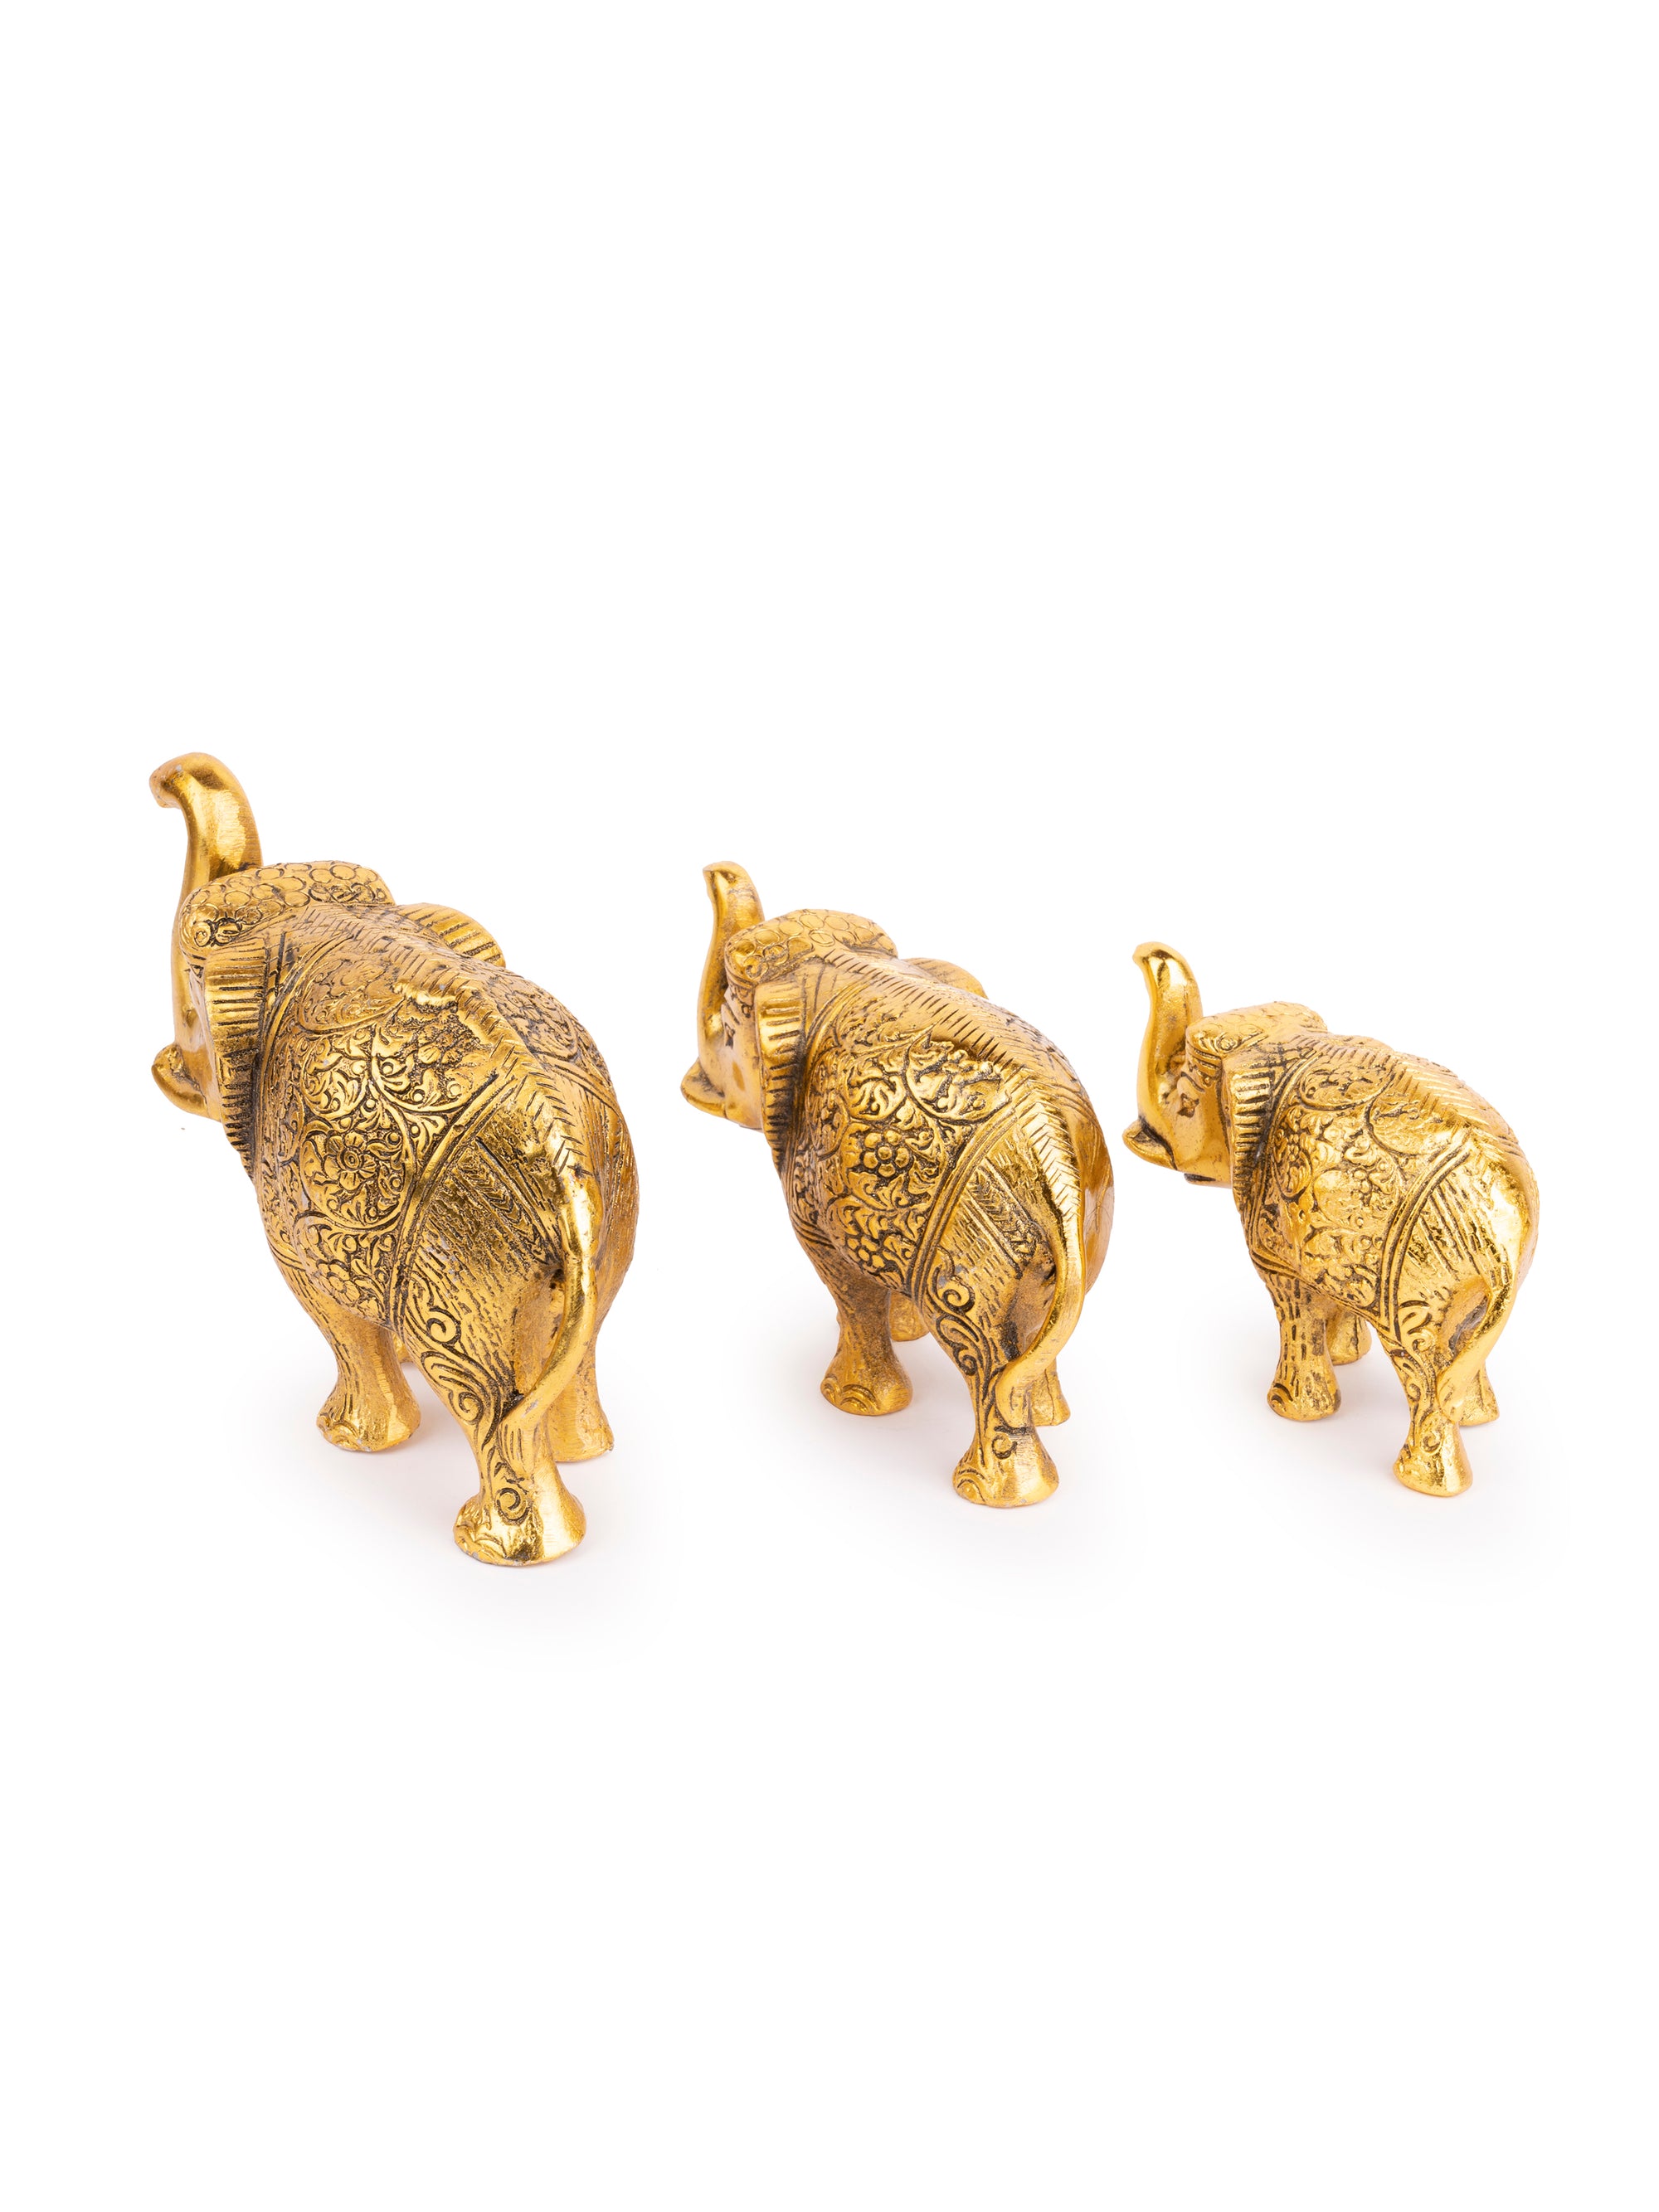 Herd of Elephants in Antique Gold Finish - Set of 3 pieces - The Heritage Artifacts